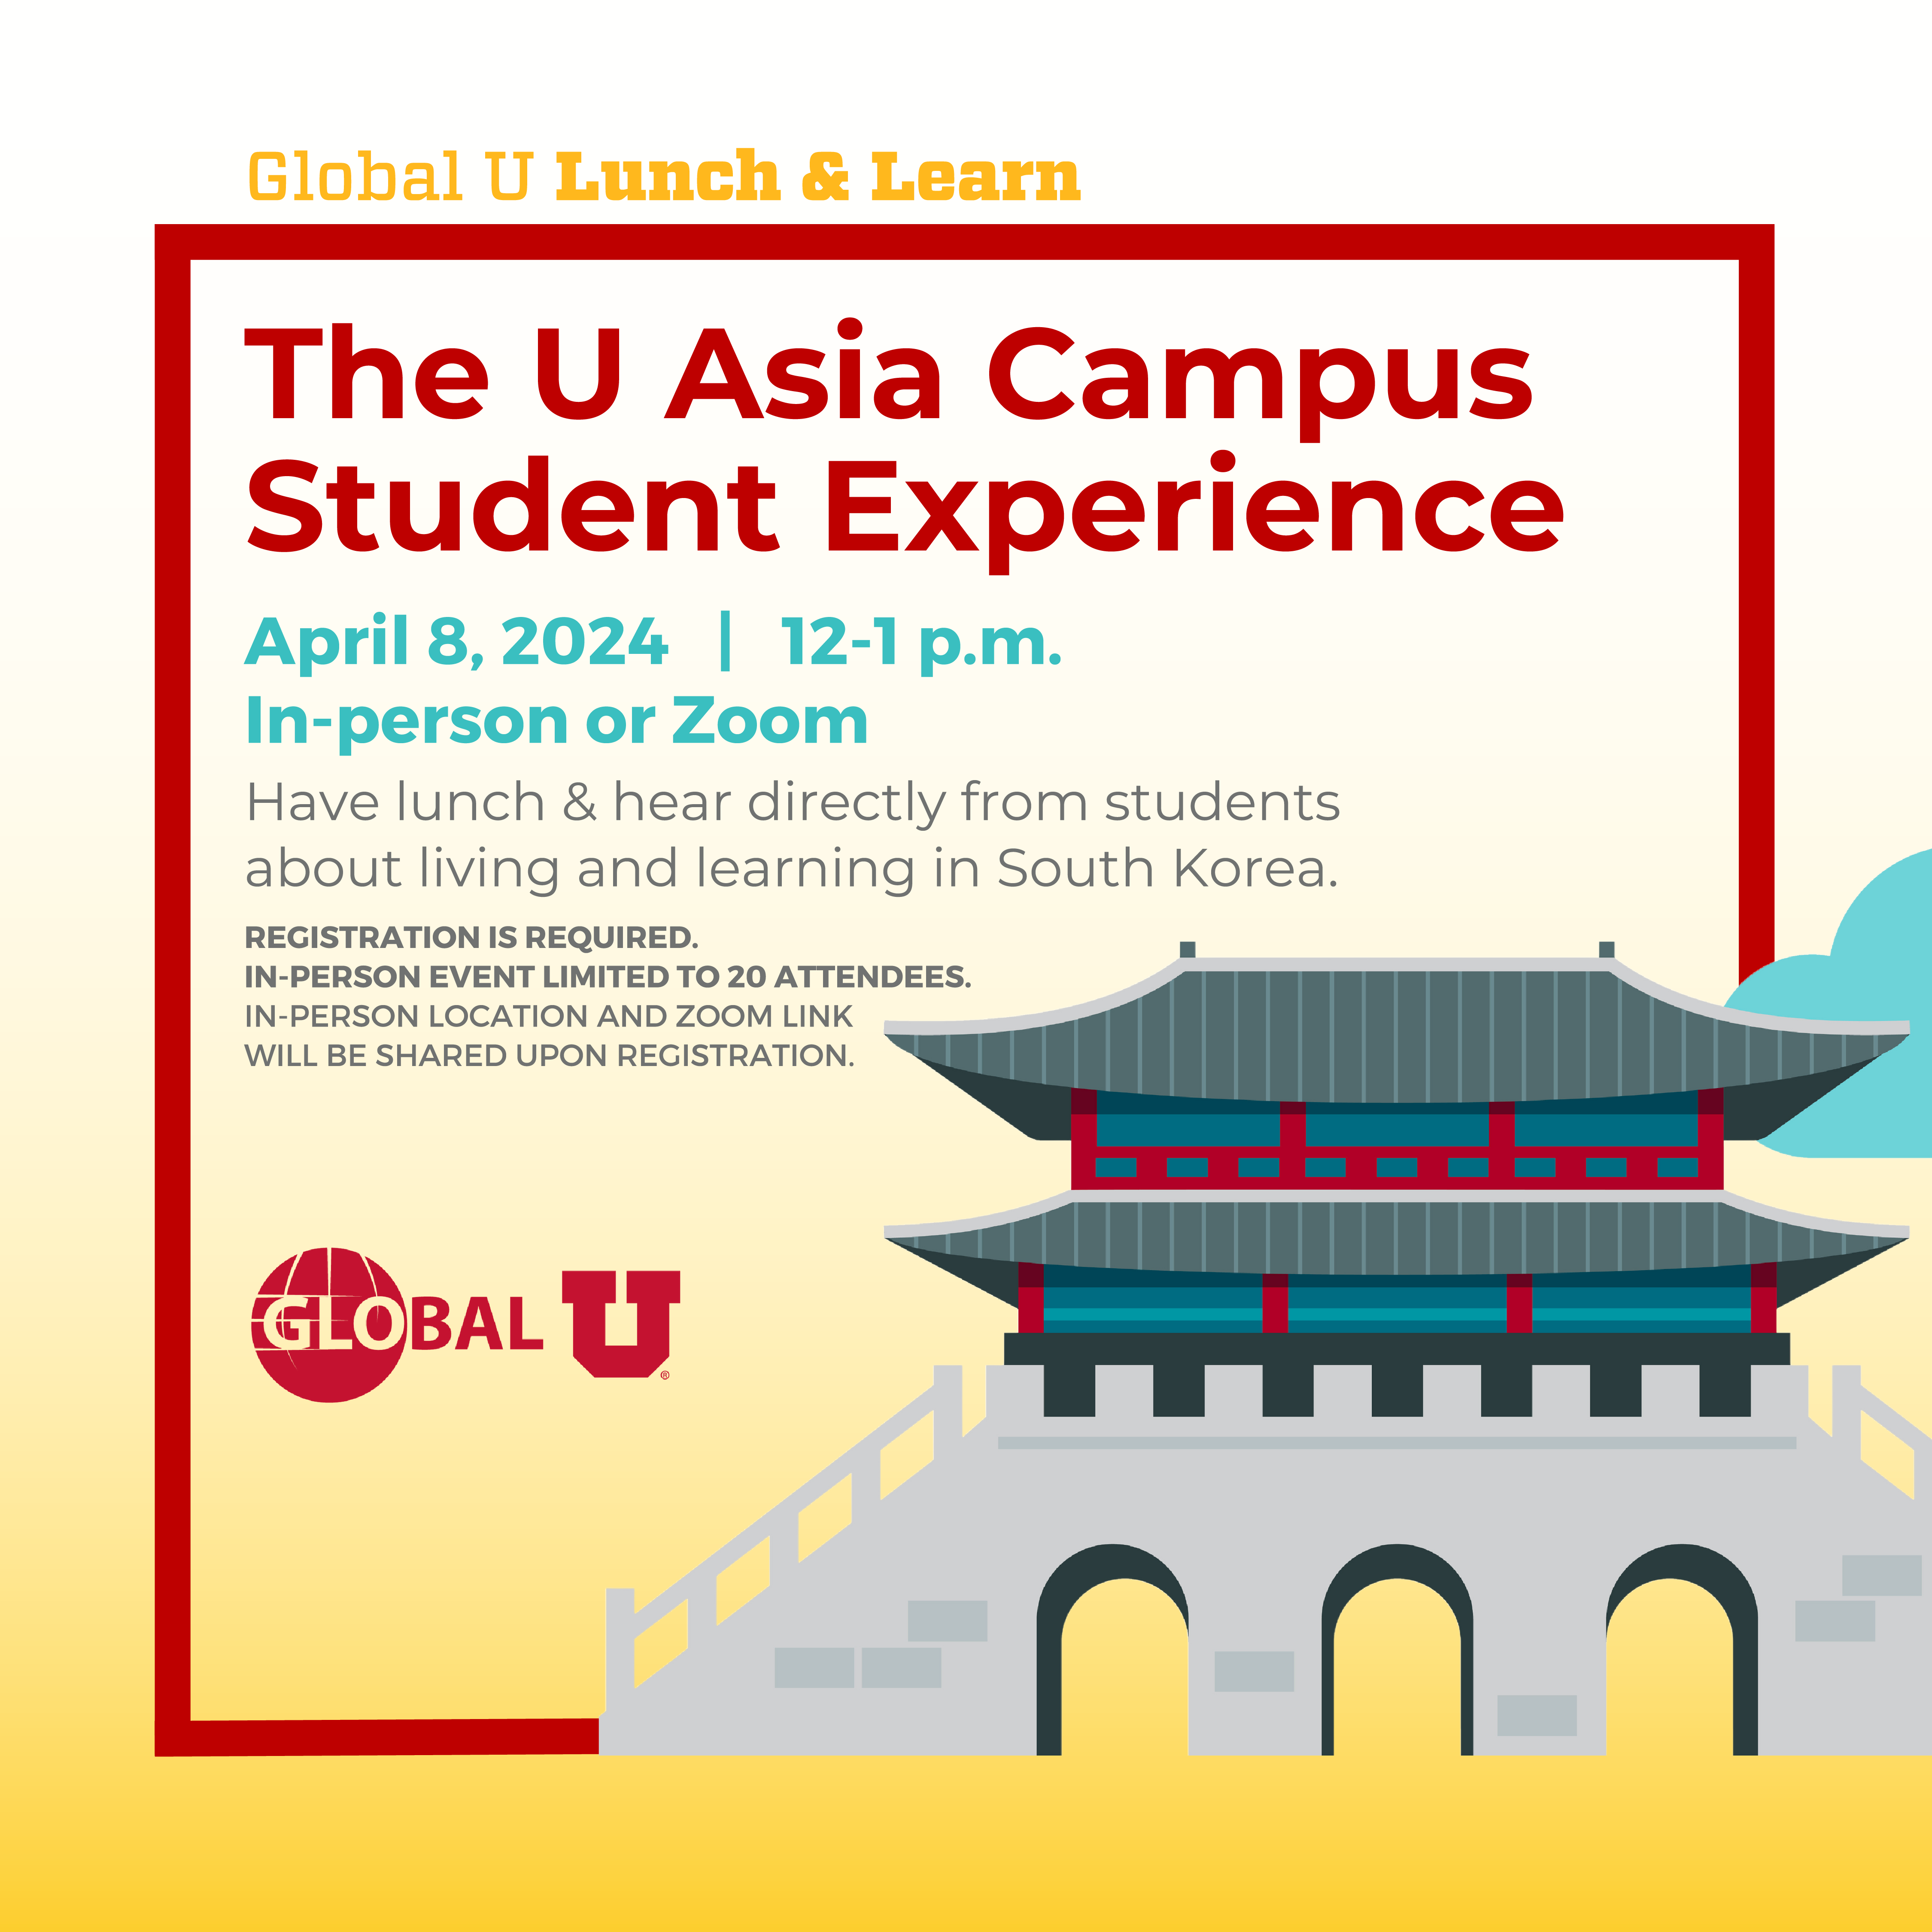 The U Asia Campus Student Experience